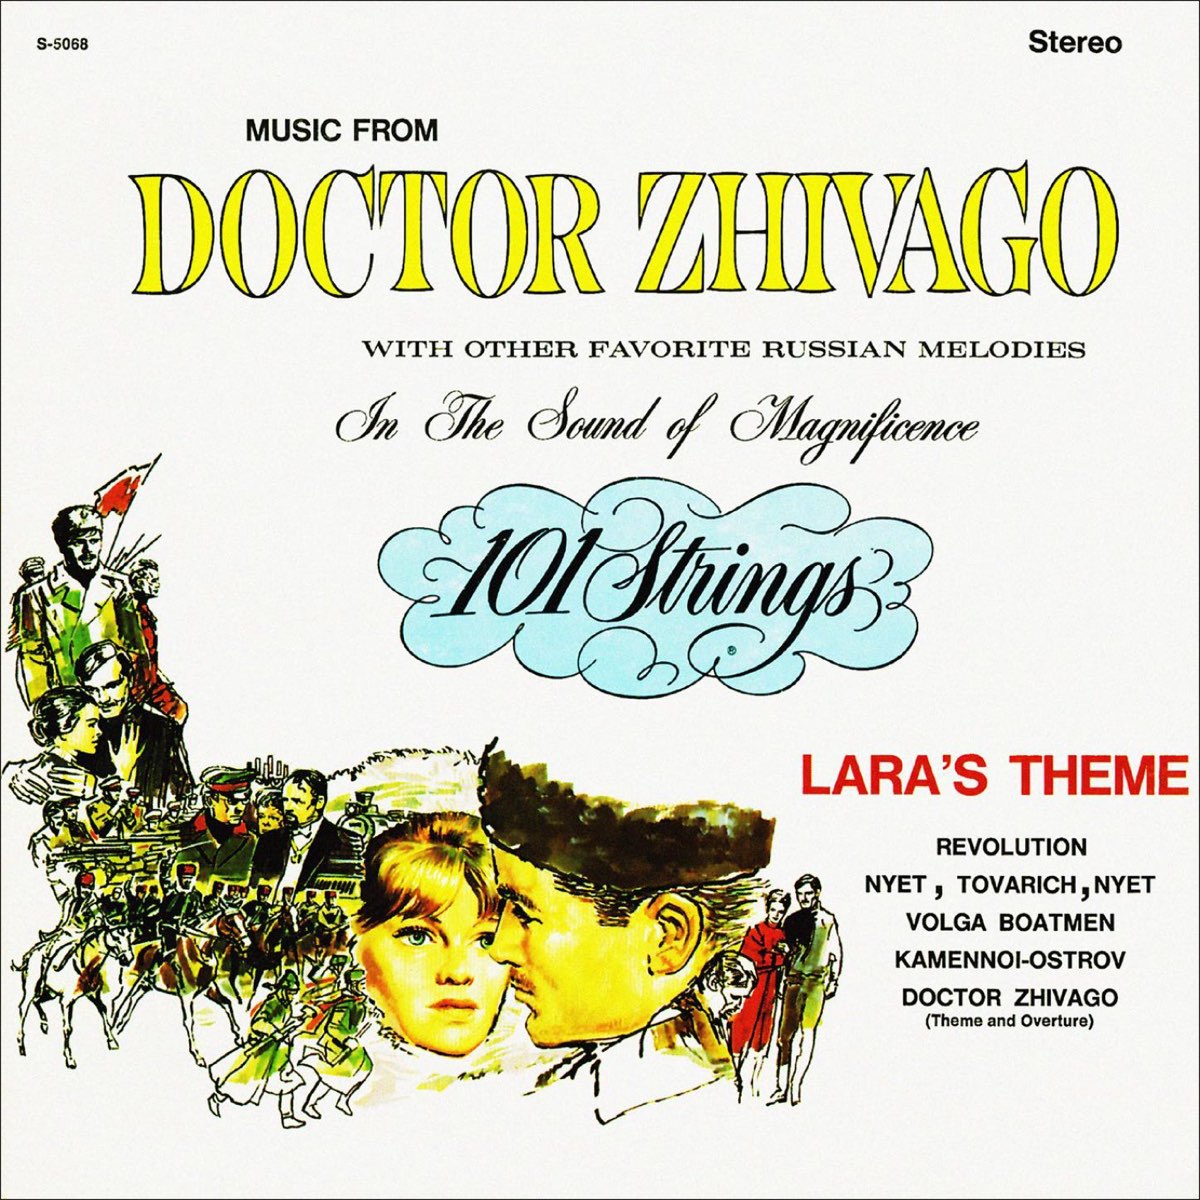 Lara Theme Zhivago. Overture to Revolution. Main Strings Orchestra. 101 Strings Orchestra – wonderful Waltzes (2023). The other favorite